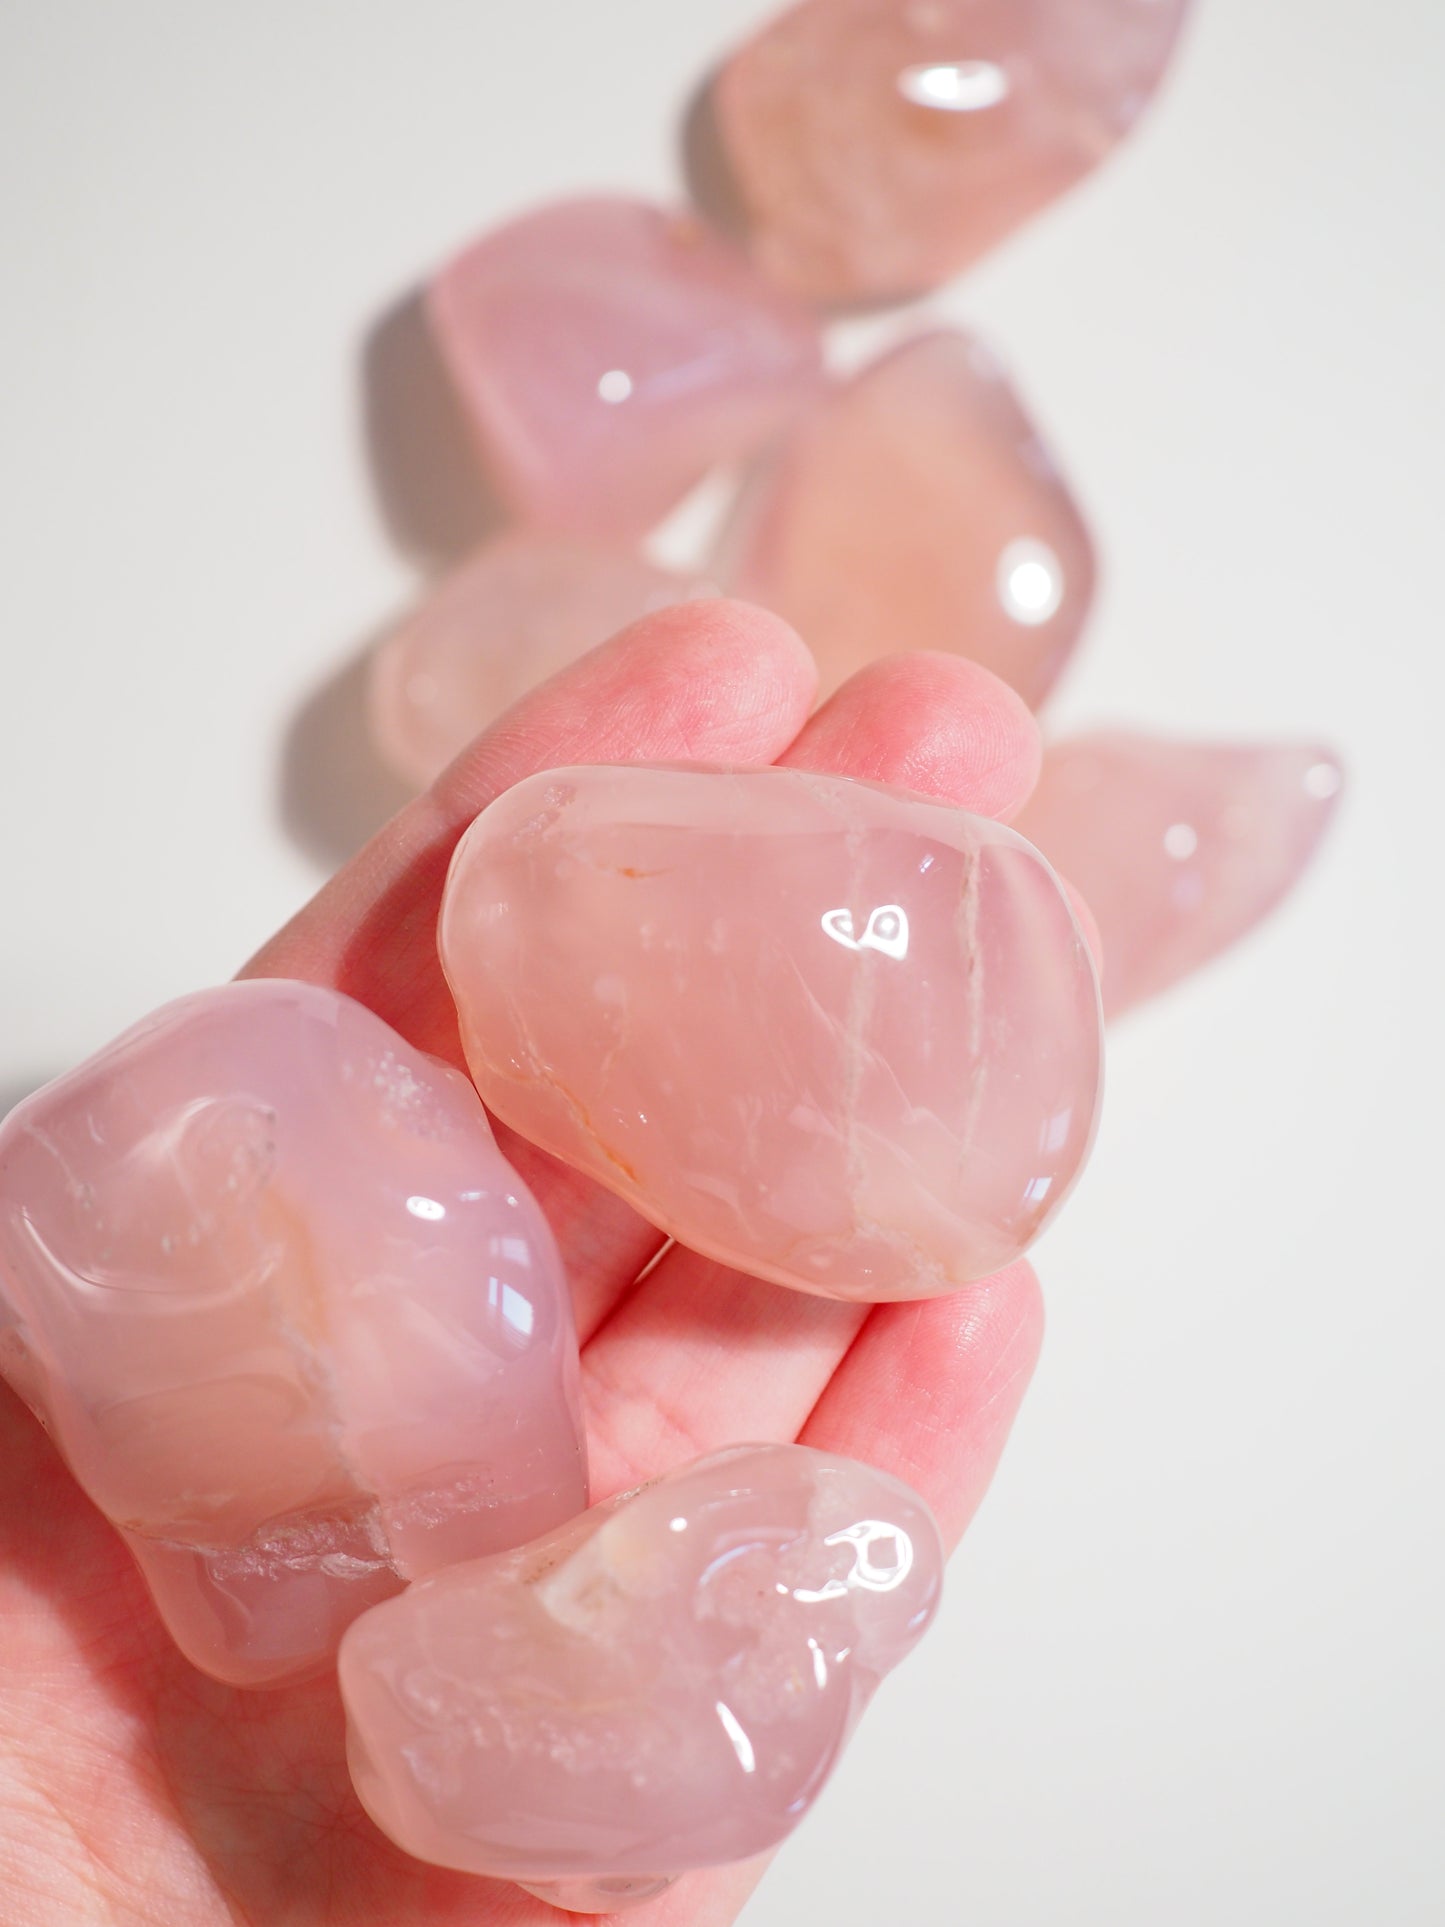 Pinker Chalcedon Trommelstein / Pink Chalcedony Tumble ca. 4-5 cm XXL - aus Mosambique HIGH QUALITY RARE